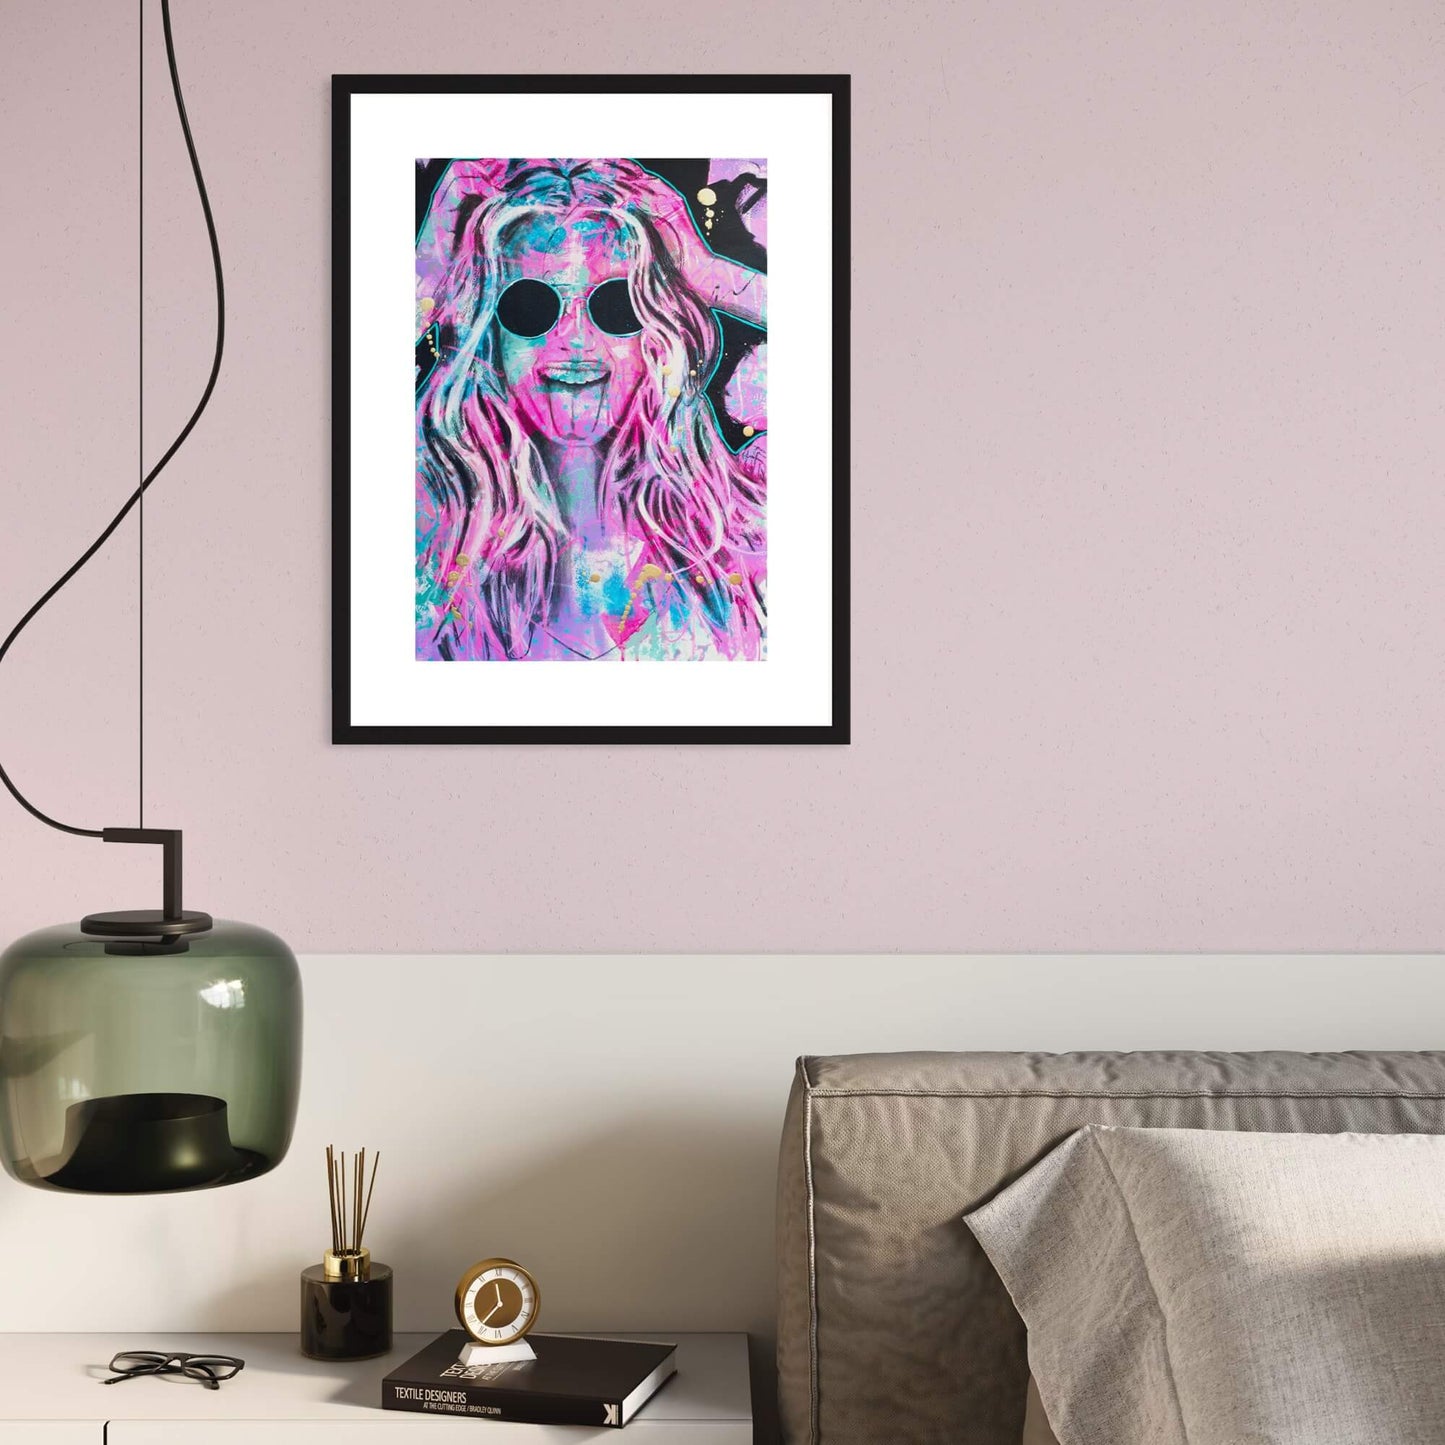 Artworks for Sale – A2 Colourful Portrait of Woman – Hot Pink & Purple  - 'Full Hectic' – Art Wall Painting by Criss Chaney